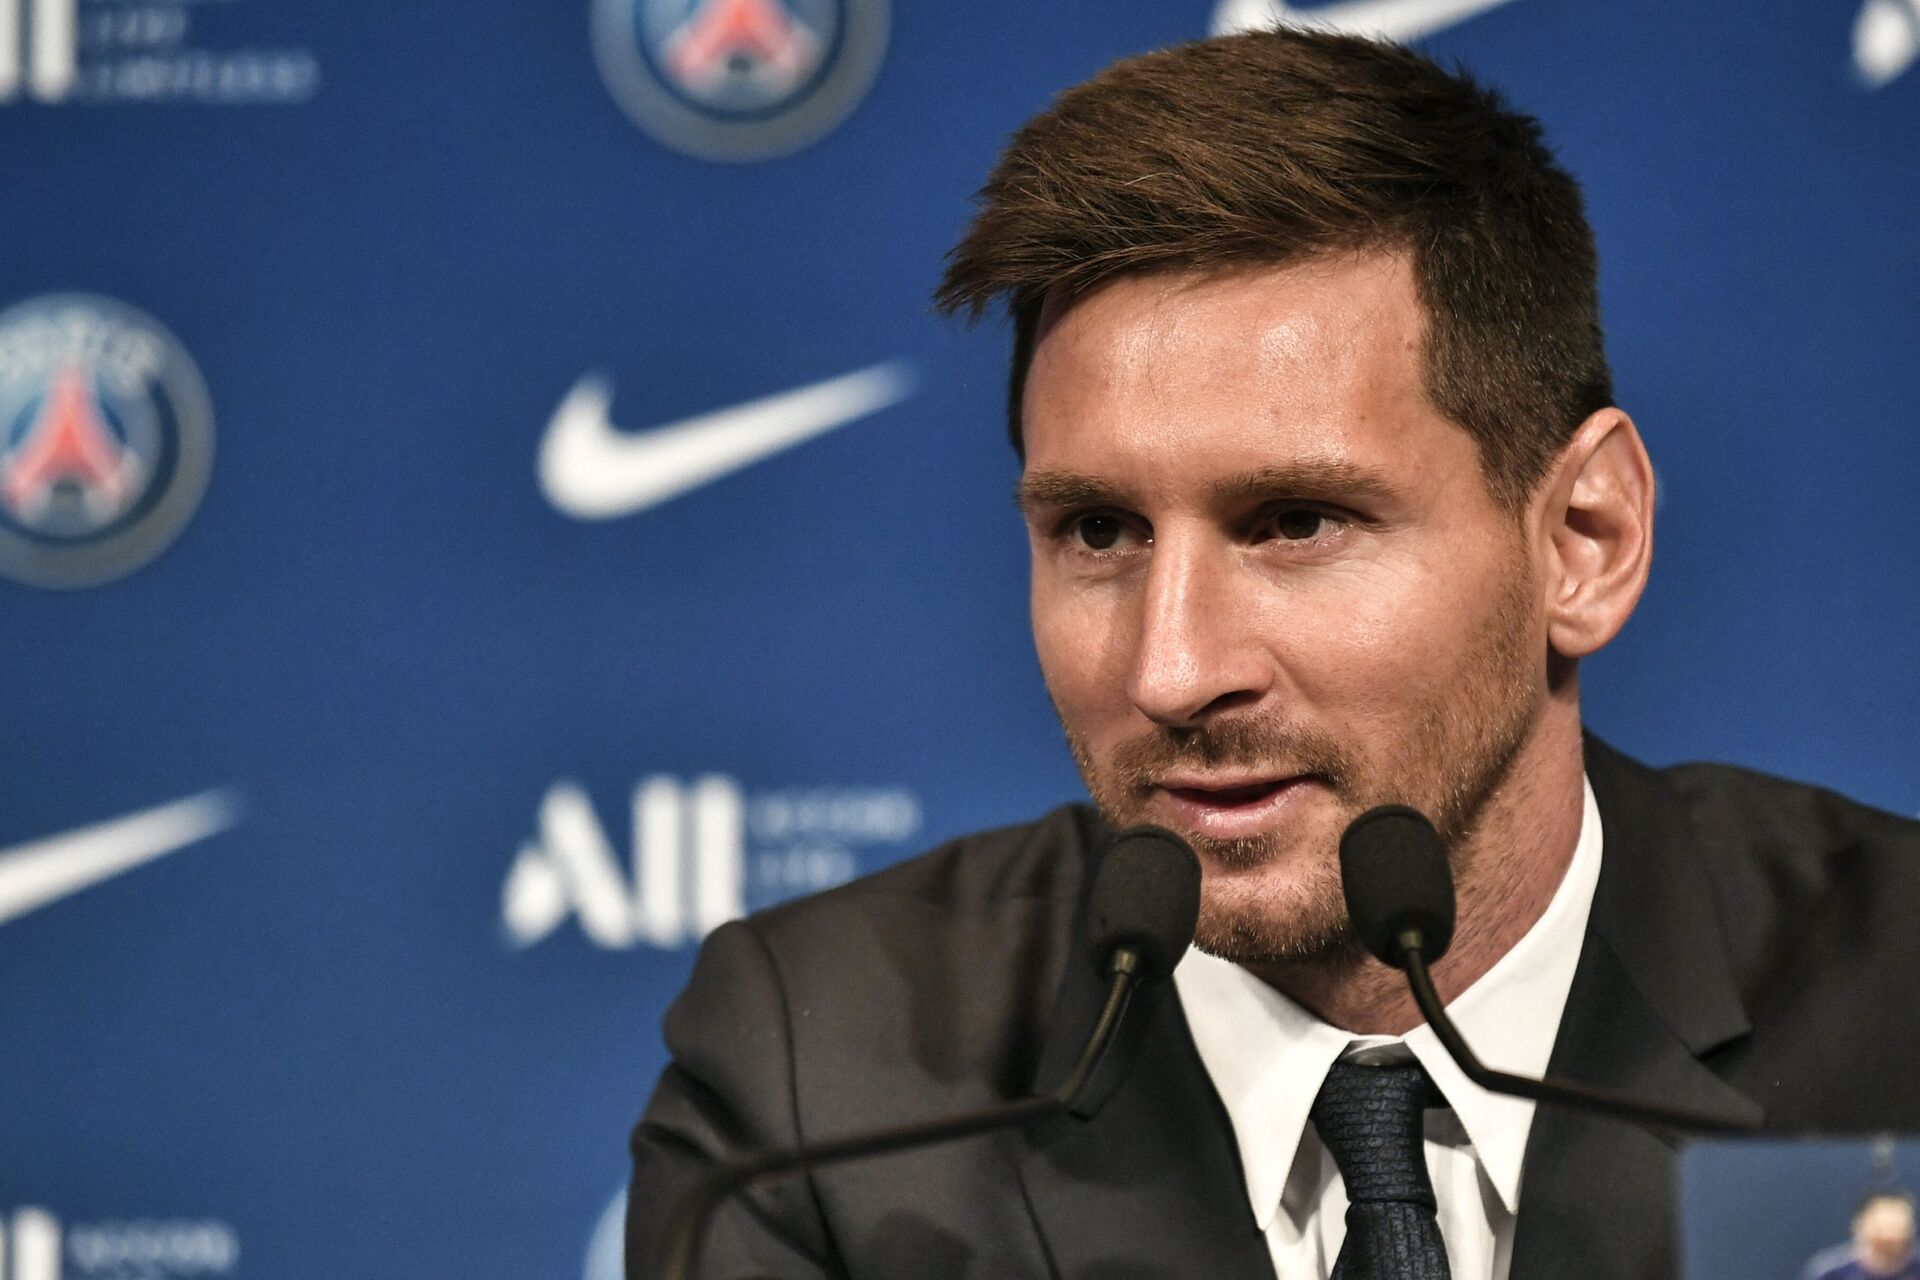 Argentinian football player Lionel Messi speaks at a press conference during his unveiling at the French football club Paris Saint-Germain's (PSG) Parc des Princes stadium in Paris on August 11, 2021. - Sputnik International, 1920, 07.09.2021